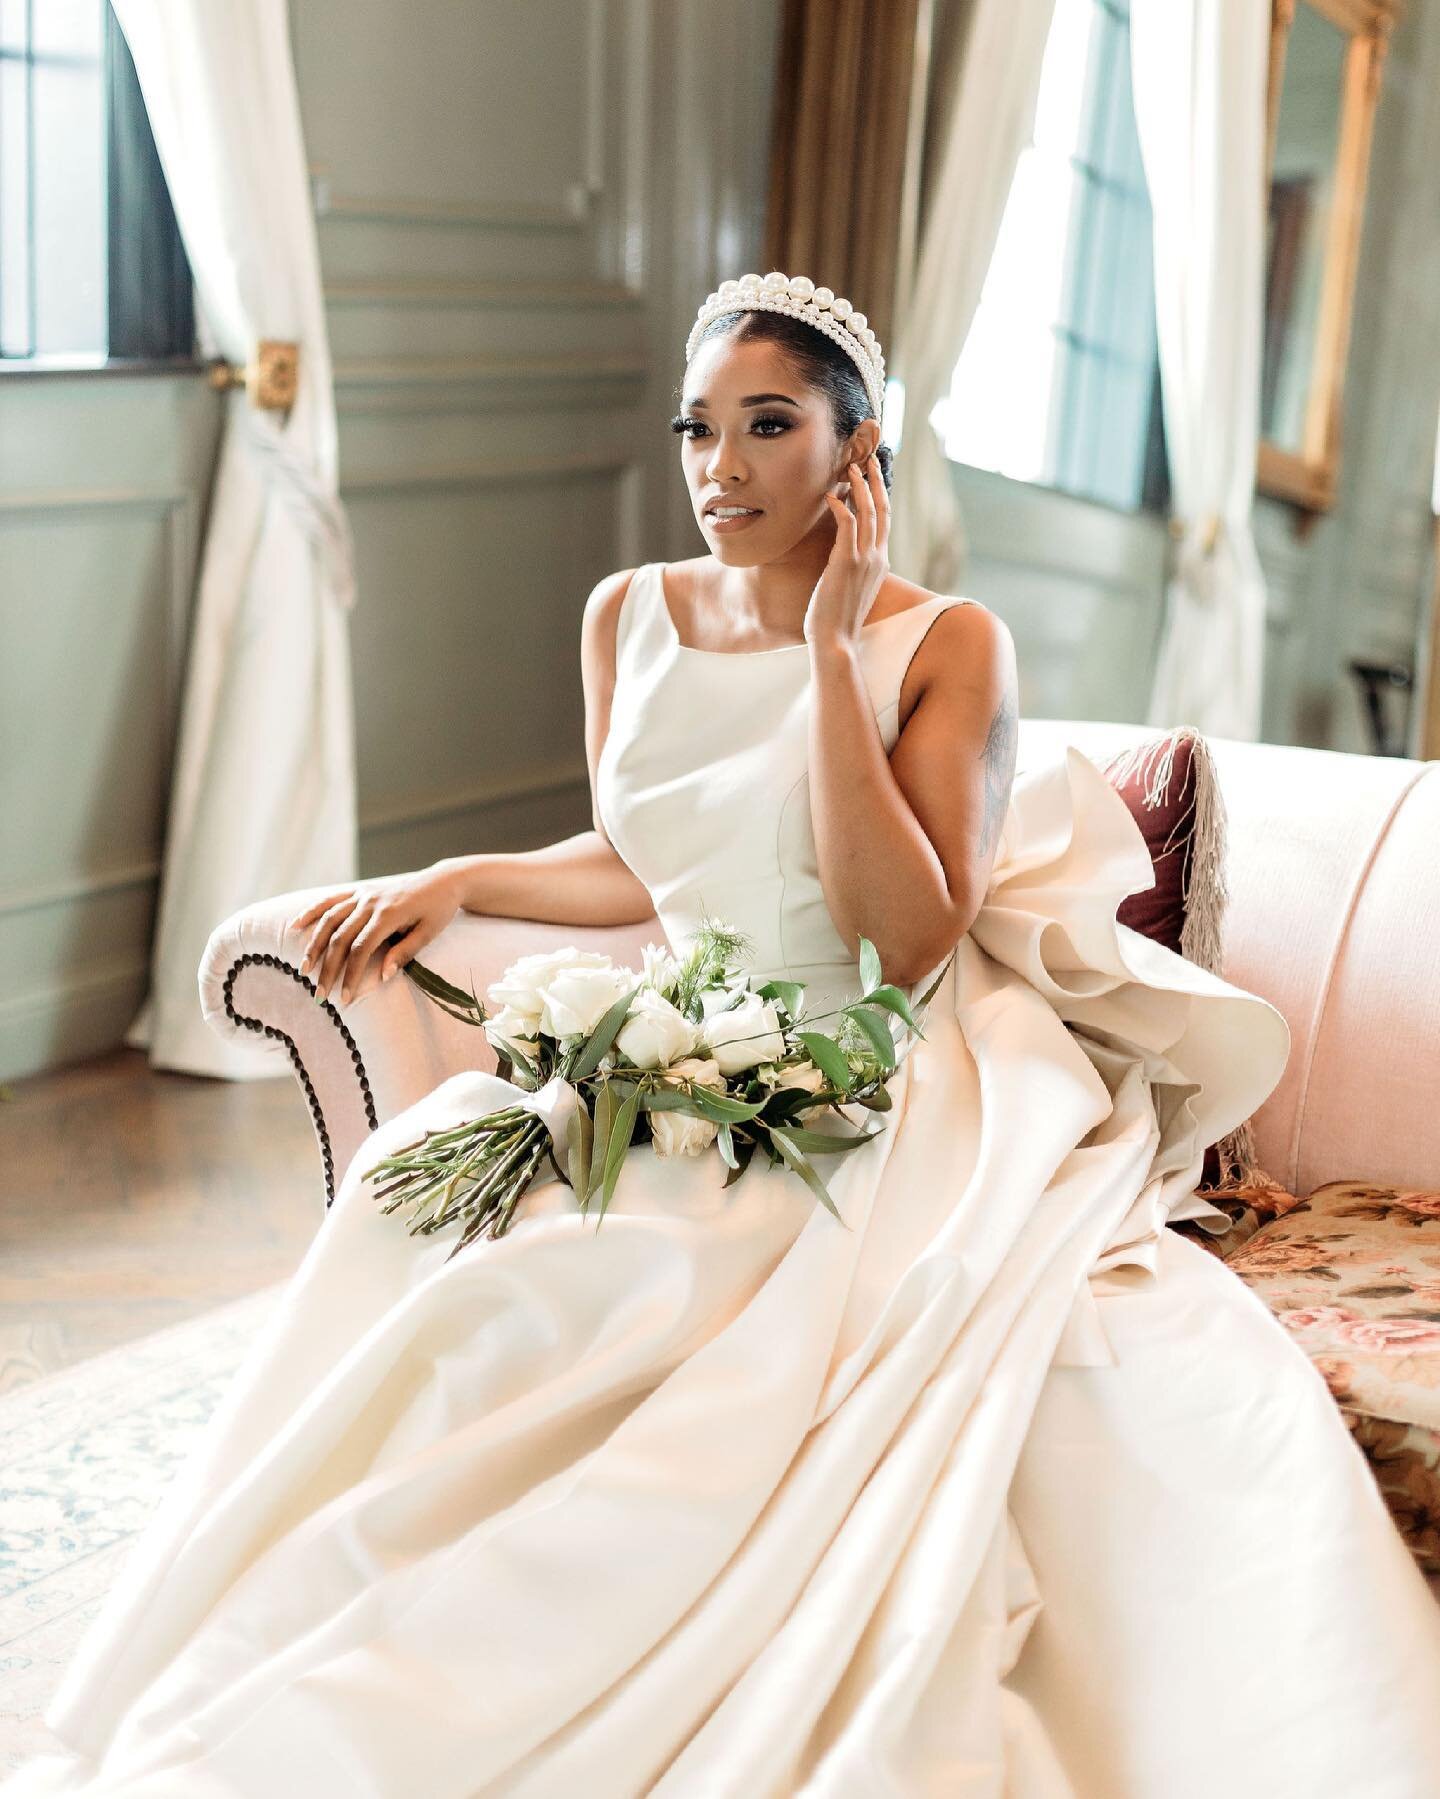 So Luxurious ✨😍 swipe to see the full length of the train on this beautiful dress! 👰🏽 

Venue: @themasondallas
Planner: @nxtlvlhouston
Makeup: @khbeautymua
Dress: @impressionbridalstores
Florals: @wildwoodwedtx
Florals: @freedomfloraltx